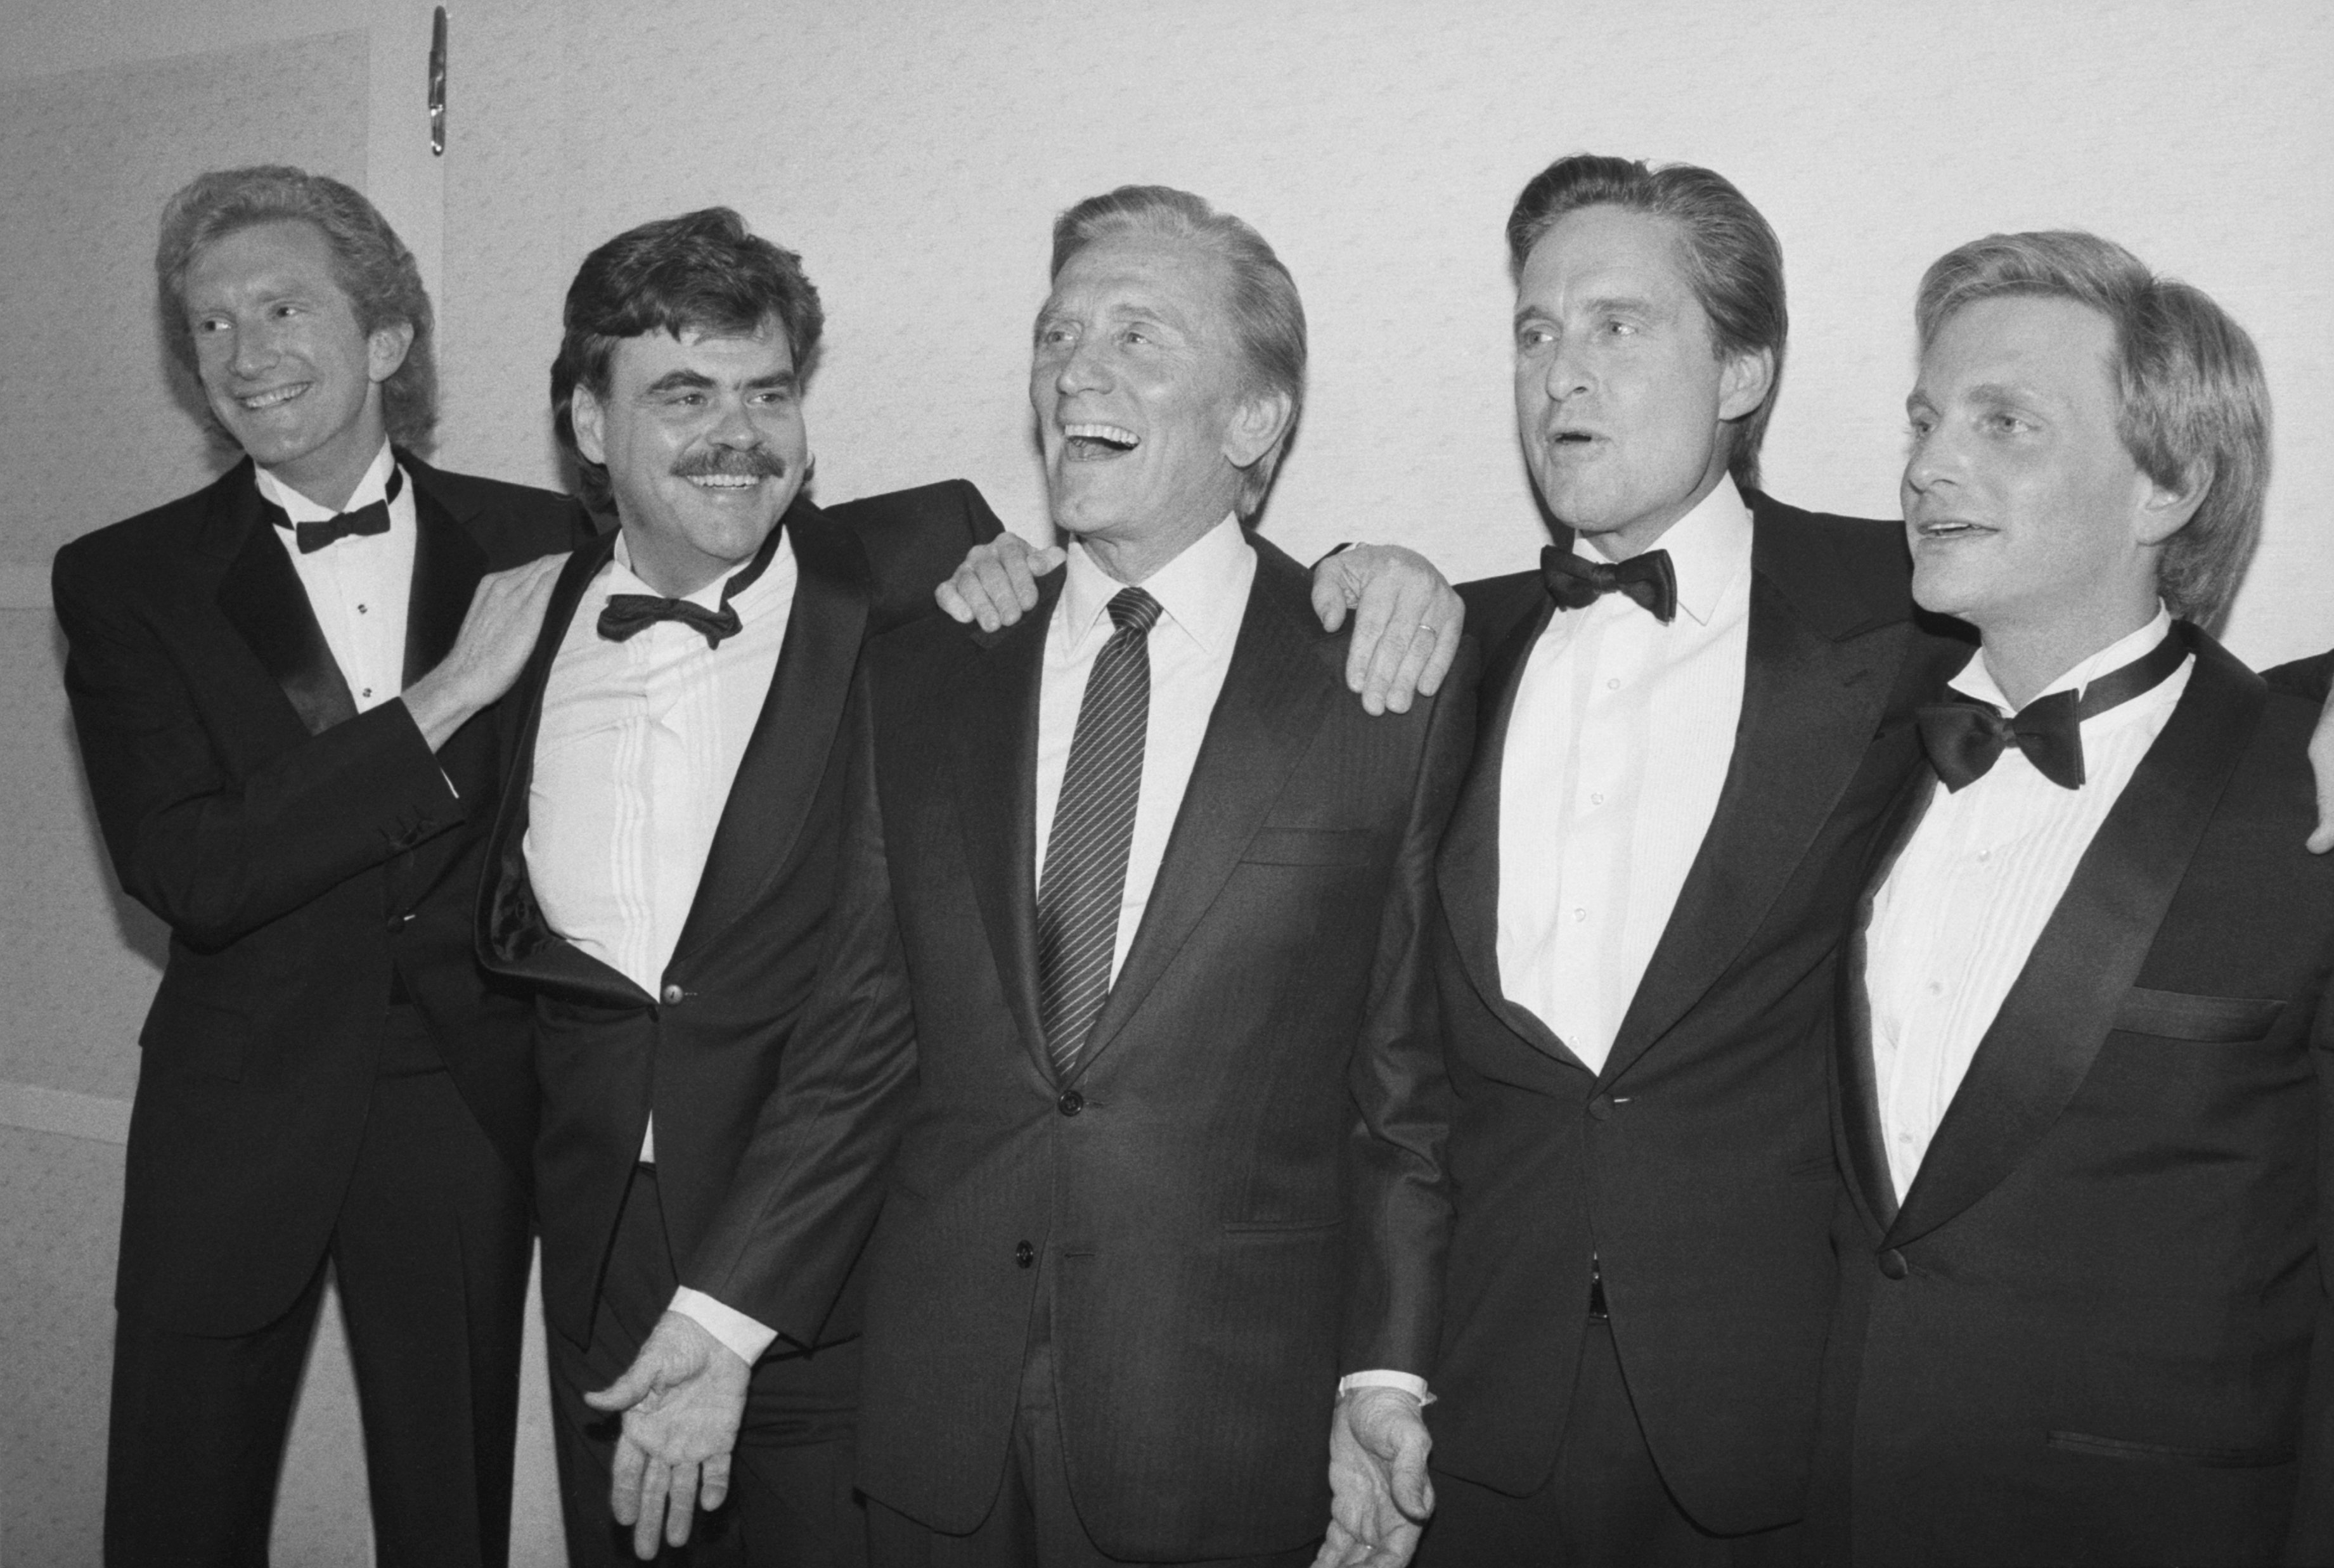 Kirk Douglas posing with his four sons during a gala evening at the Majestic Theatre in Manhattan from left to right Peter, Joel, Michael and Eric. / Source: Getty Images